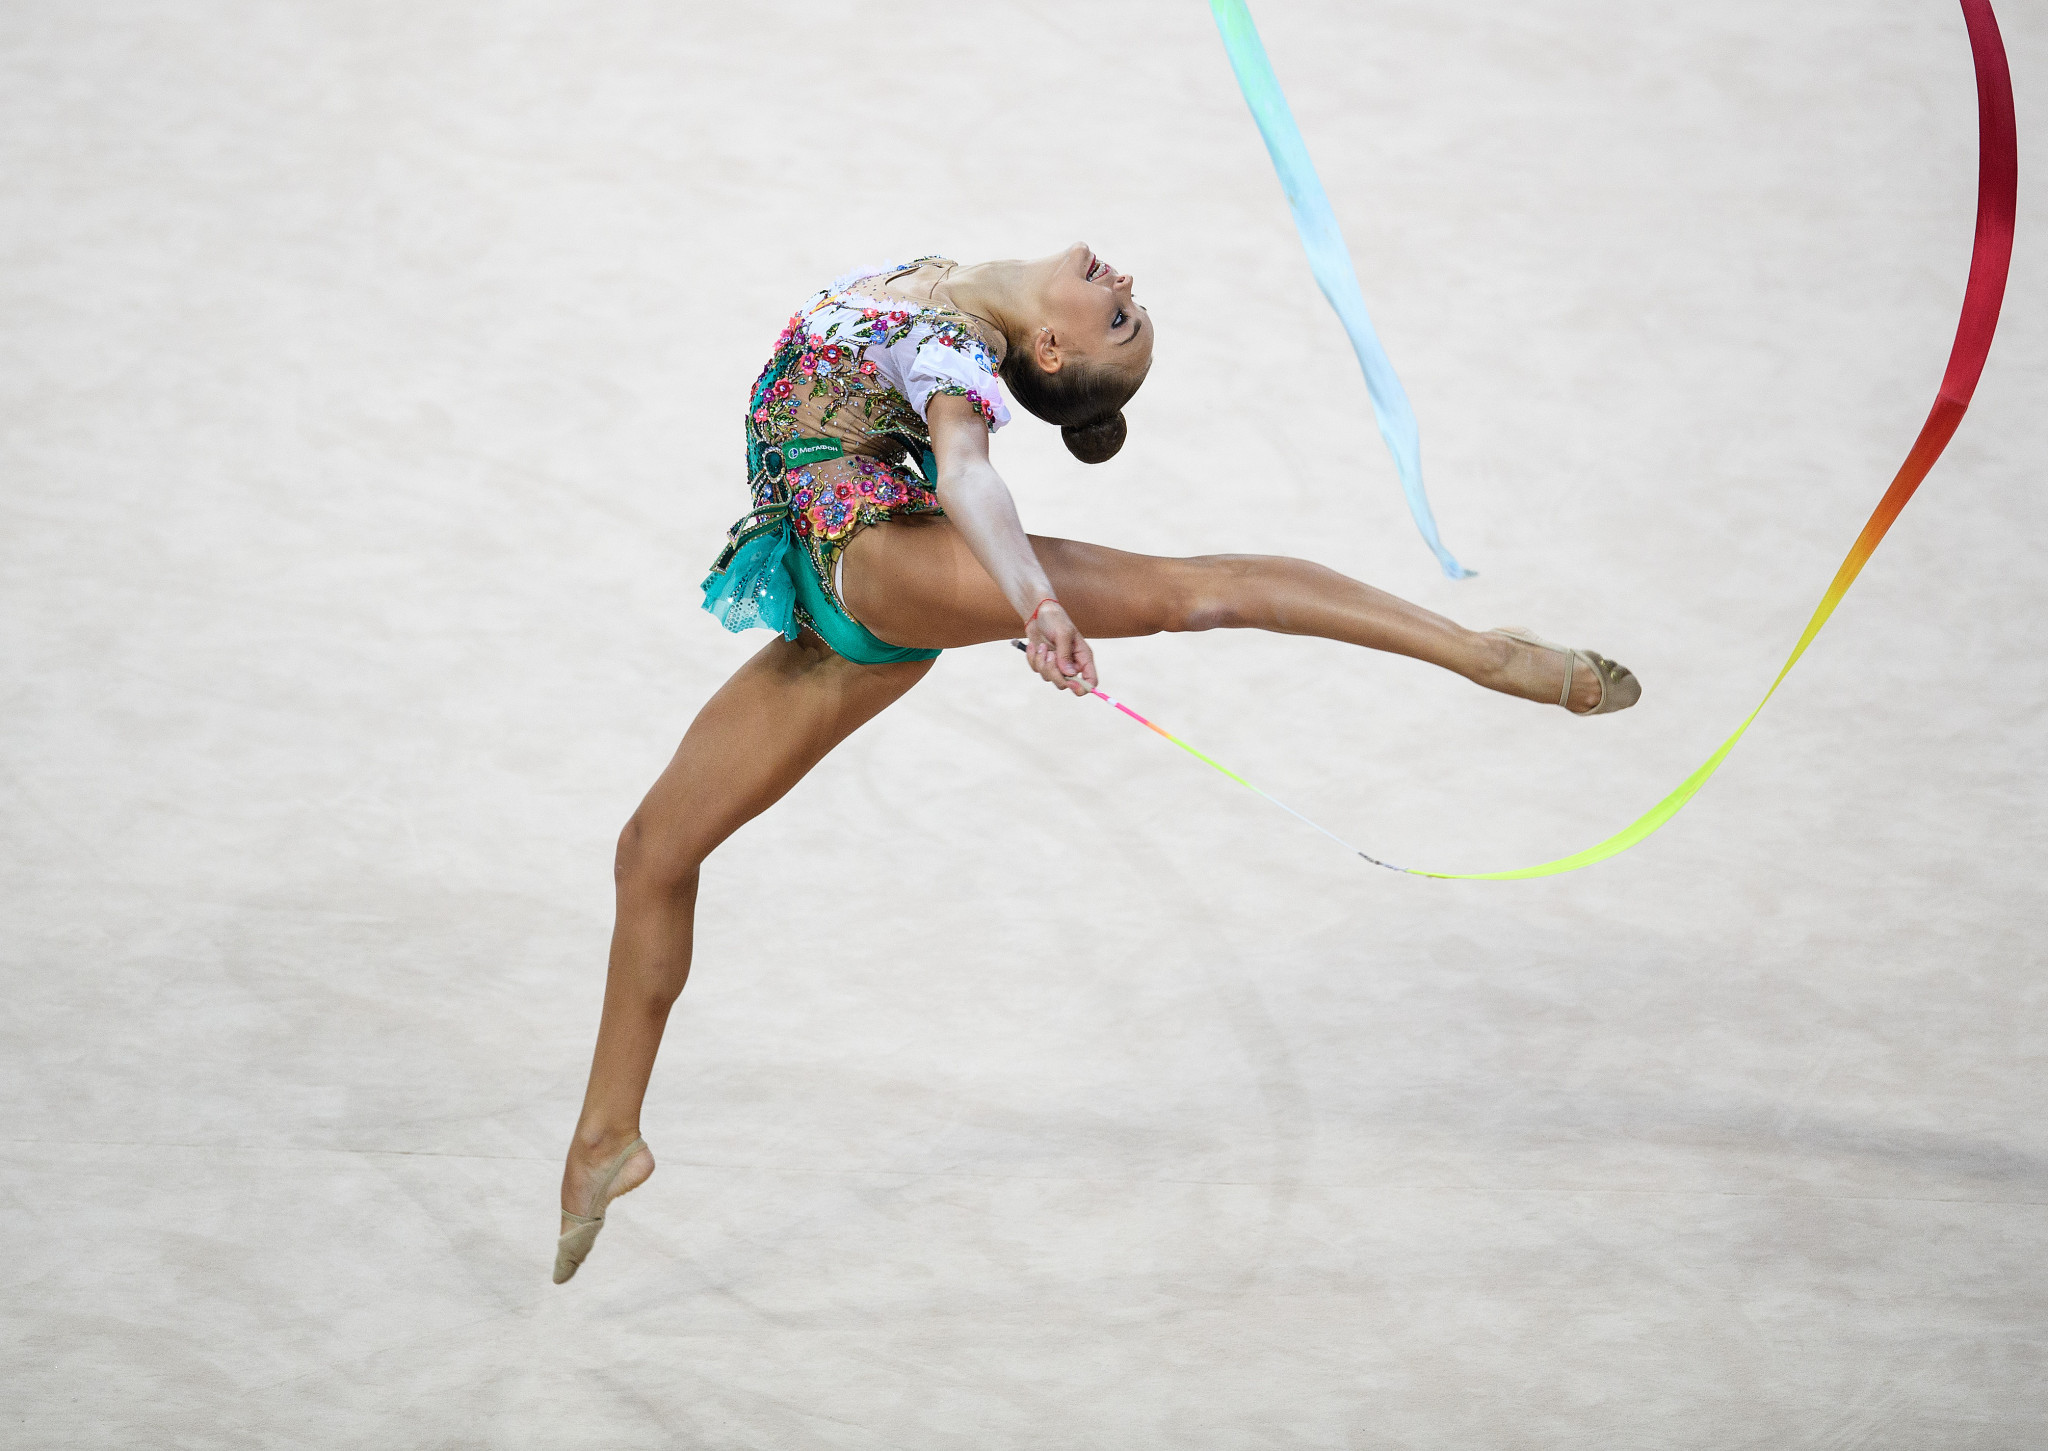 Arina Averina finished runner-up behind her sister ©Getty Images